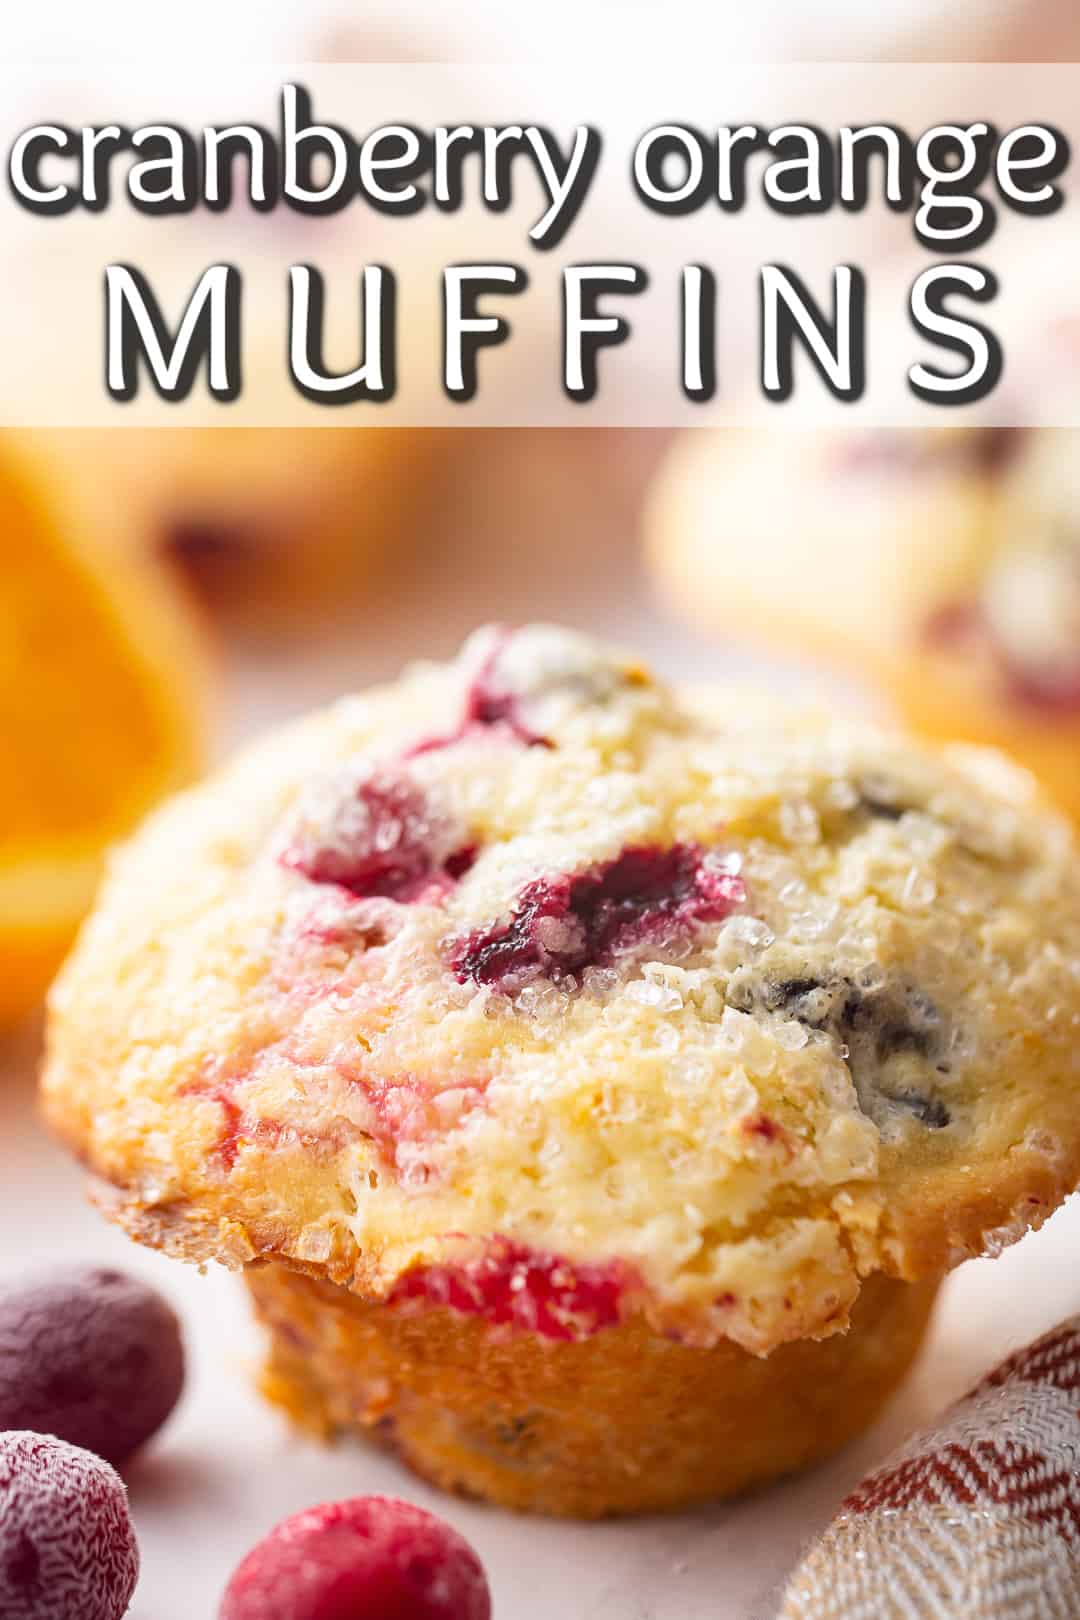 Orange cranberry muffins  with a text banner and fresh oranges and cranberries in the background.